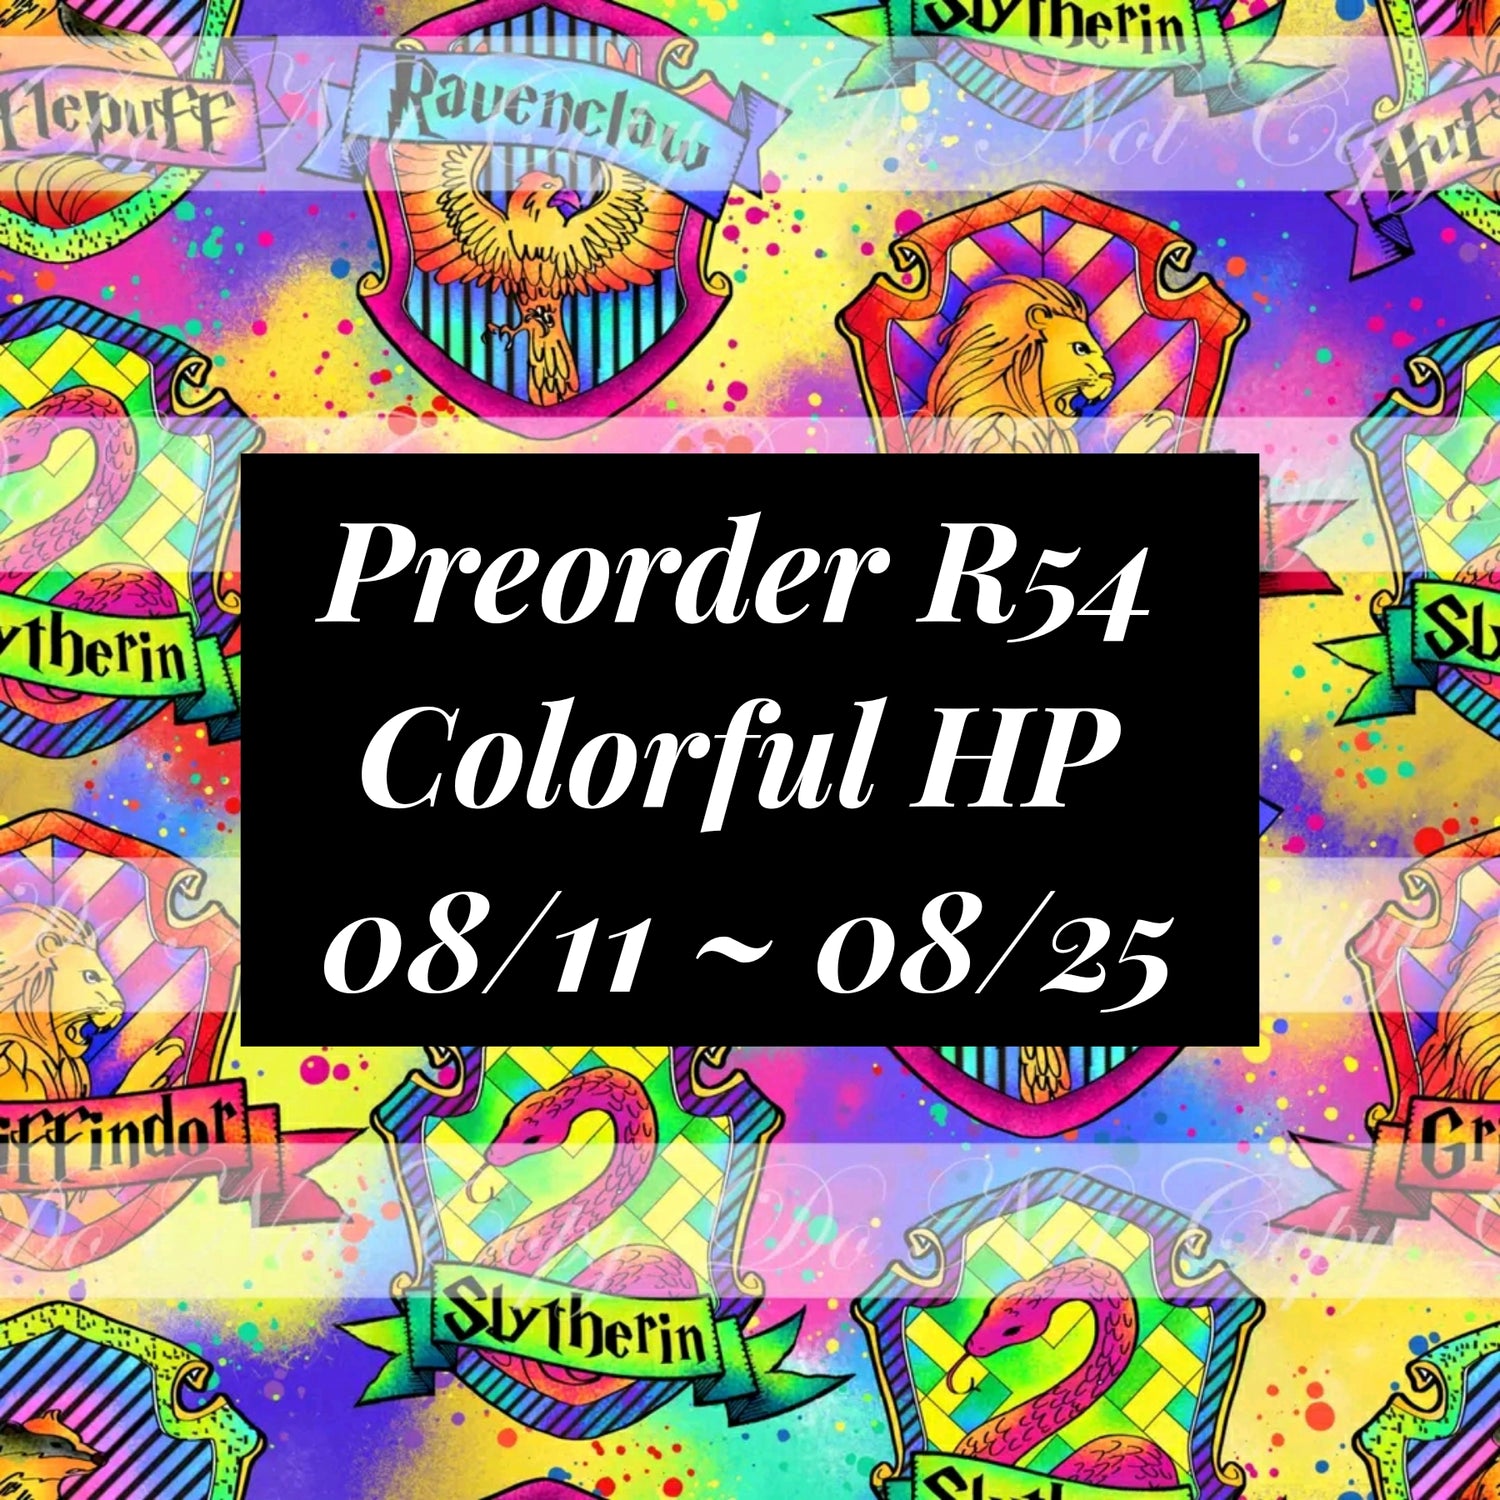 Preorder R54 - Colorful HP